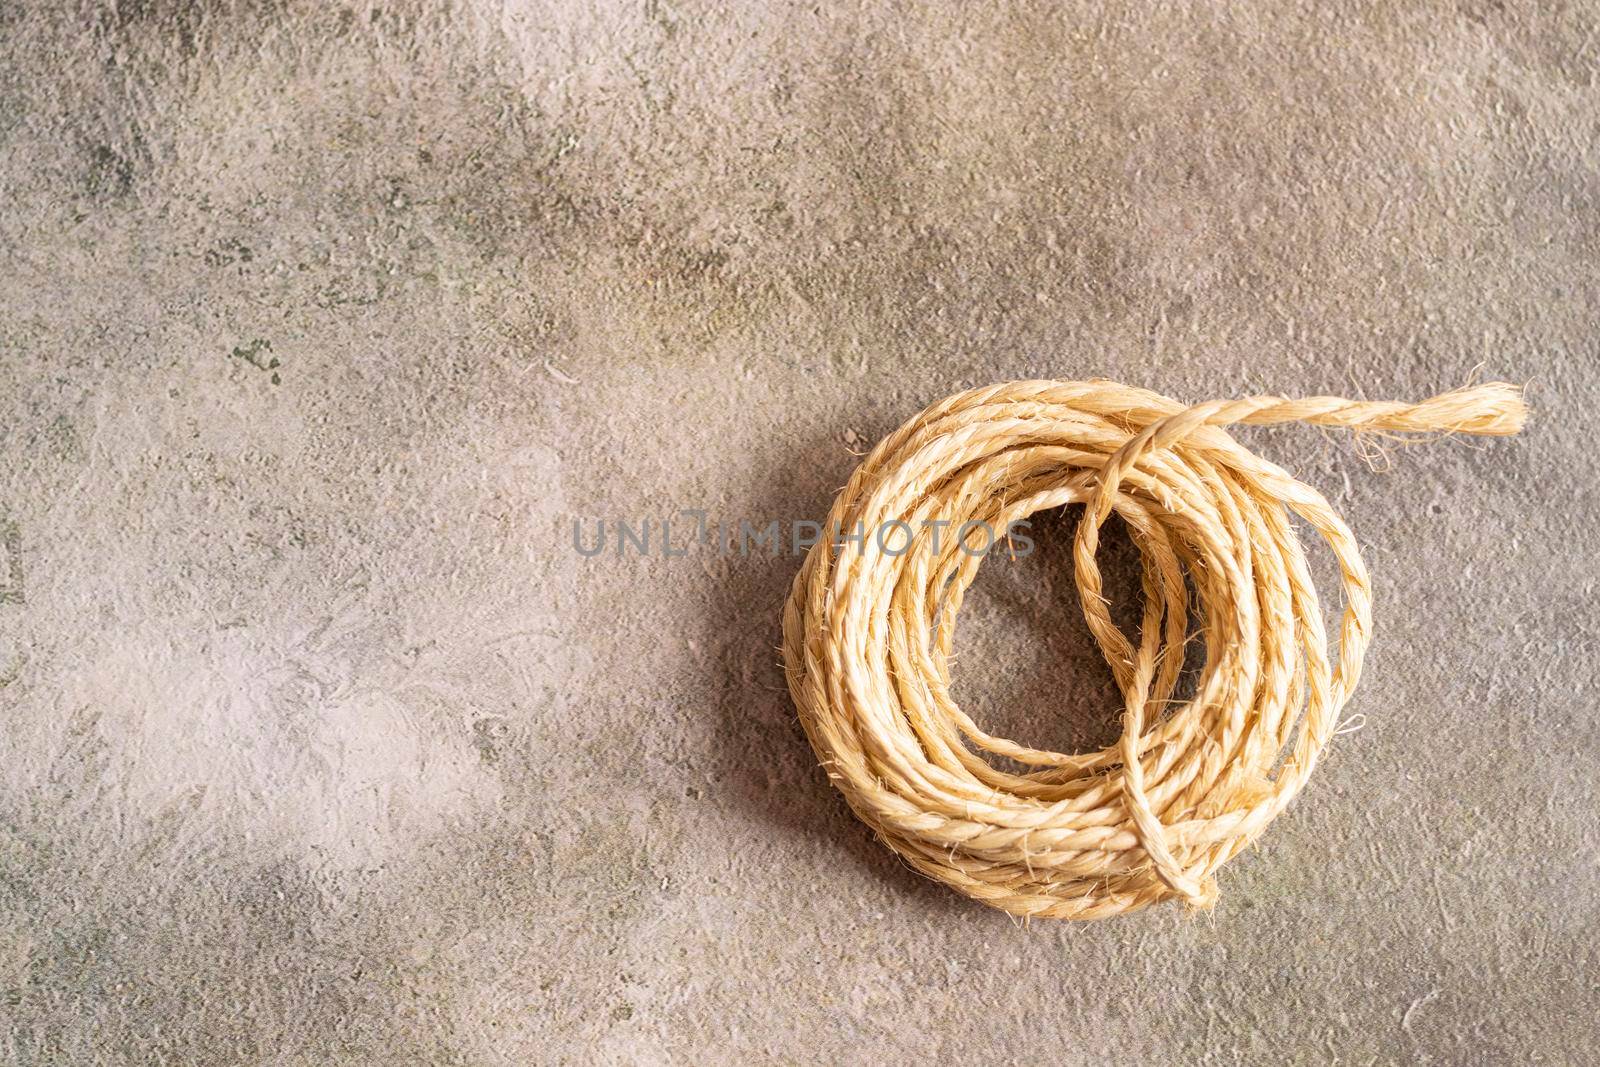 View of a roll of rope on a golden background